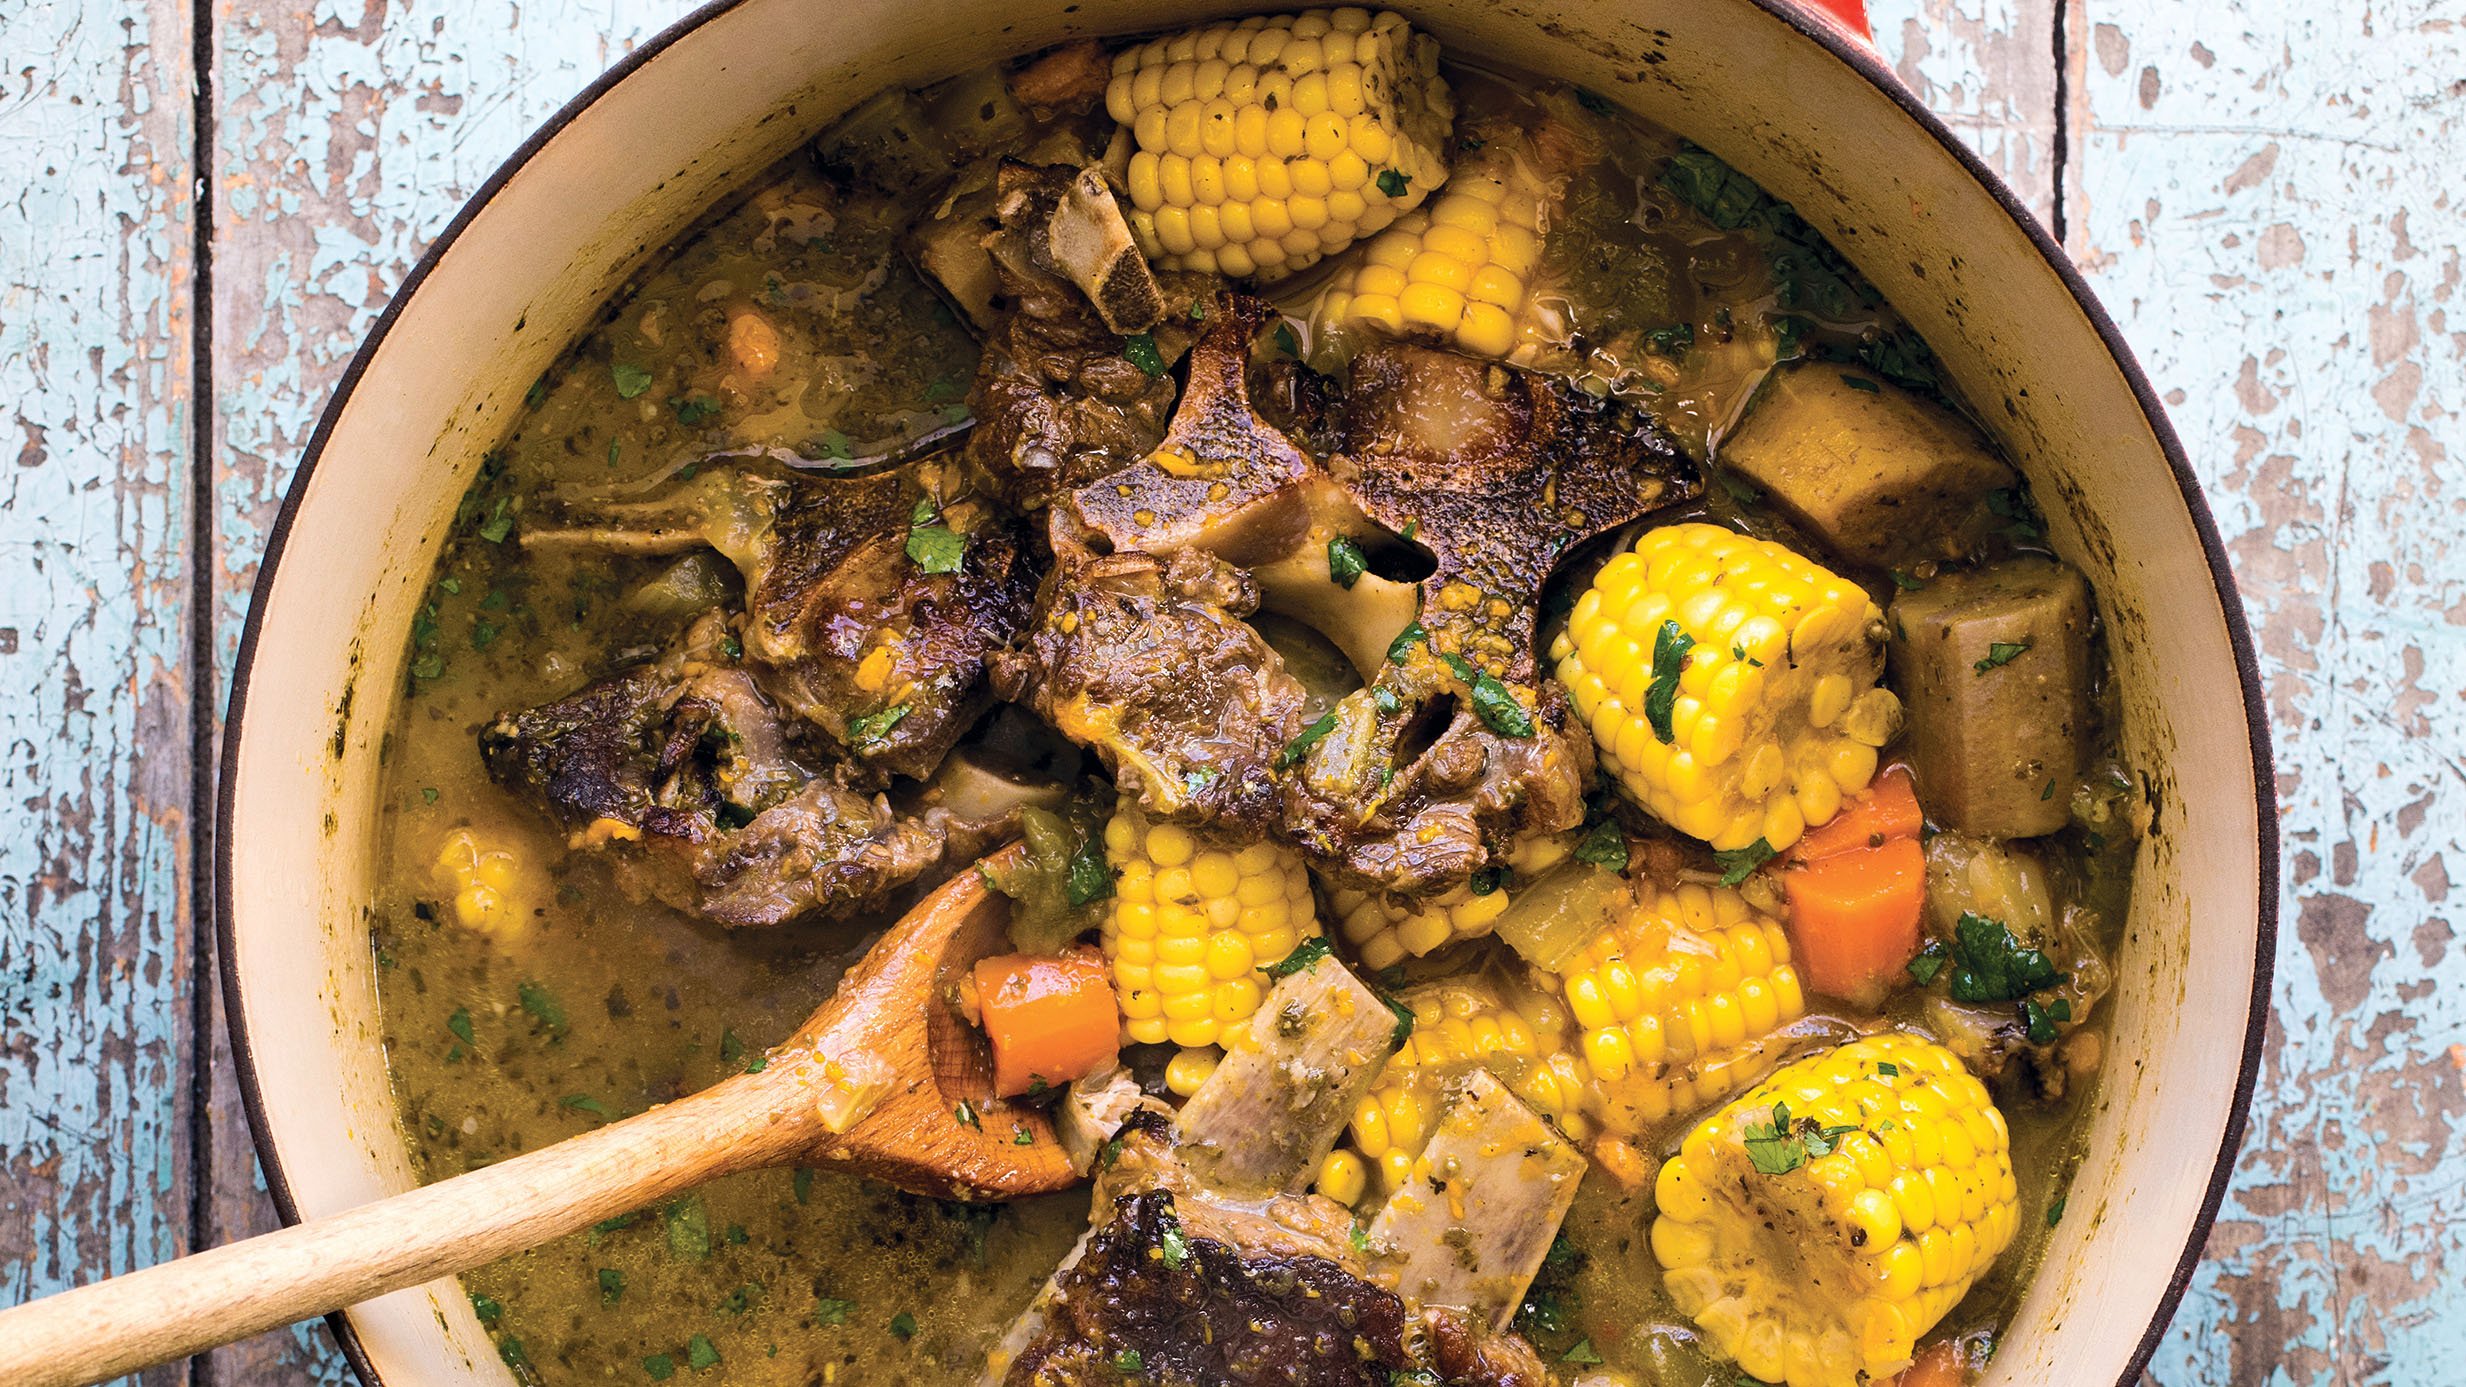 Sancocho recipe Excerpted from Heirloom Kitchen: Heritage Recipes and Family Stories from the Tables of Immigrant Women by Anna Francese Gass © 2019 Anna Francese Gass. Photos © 2019 by Andrew Scrivani.